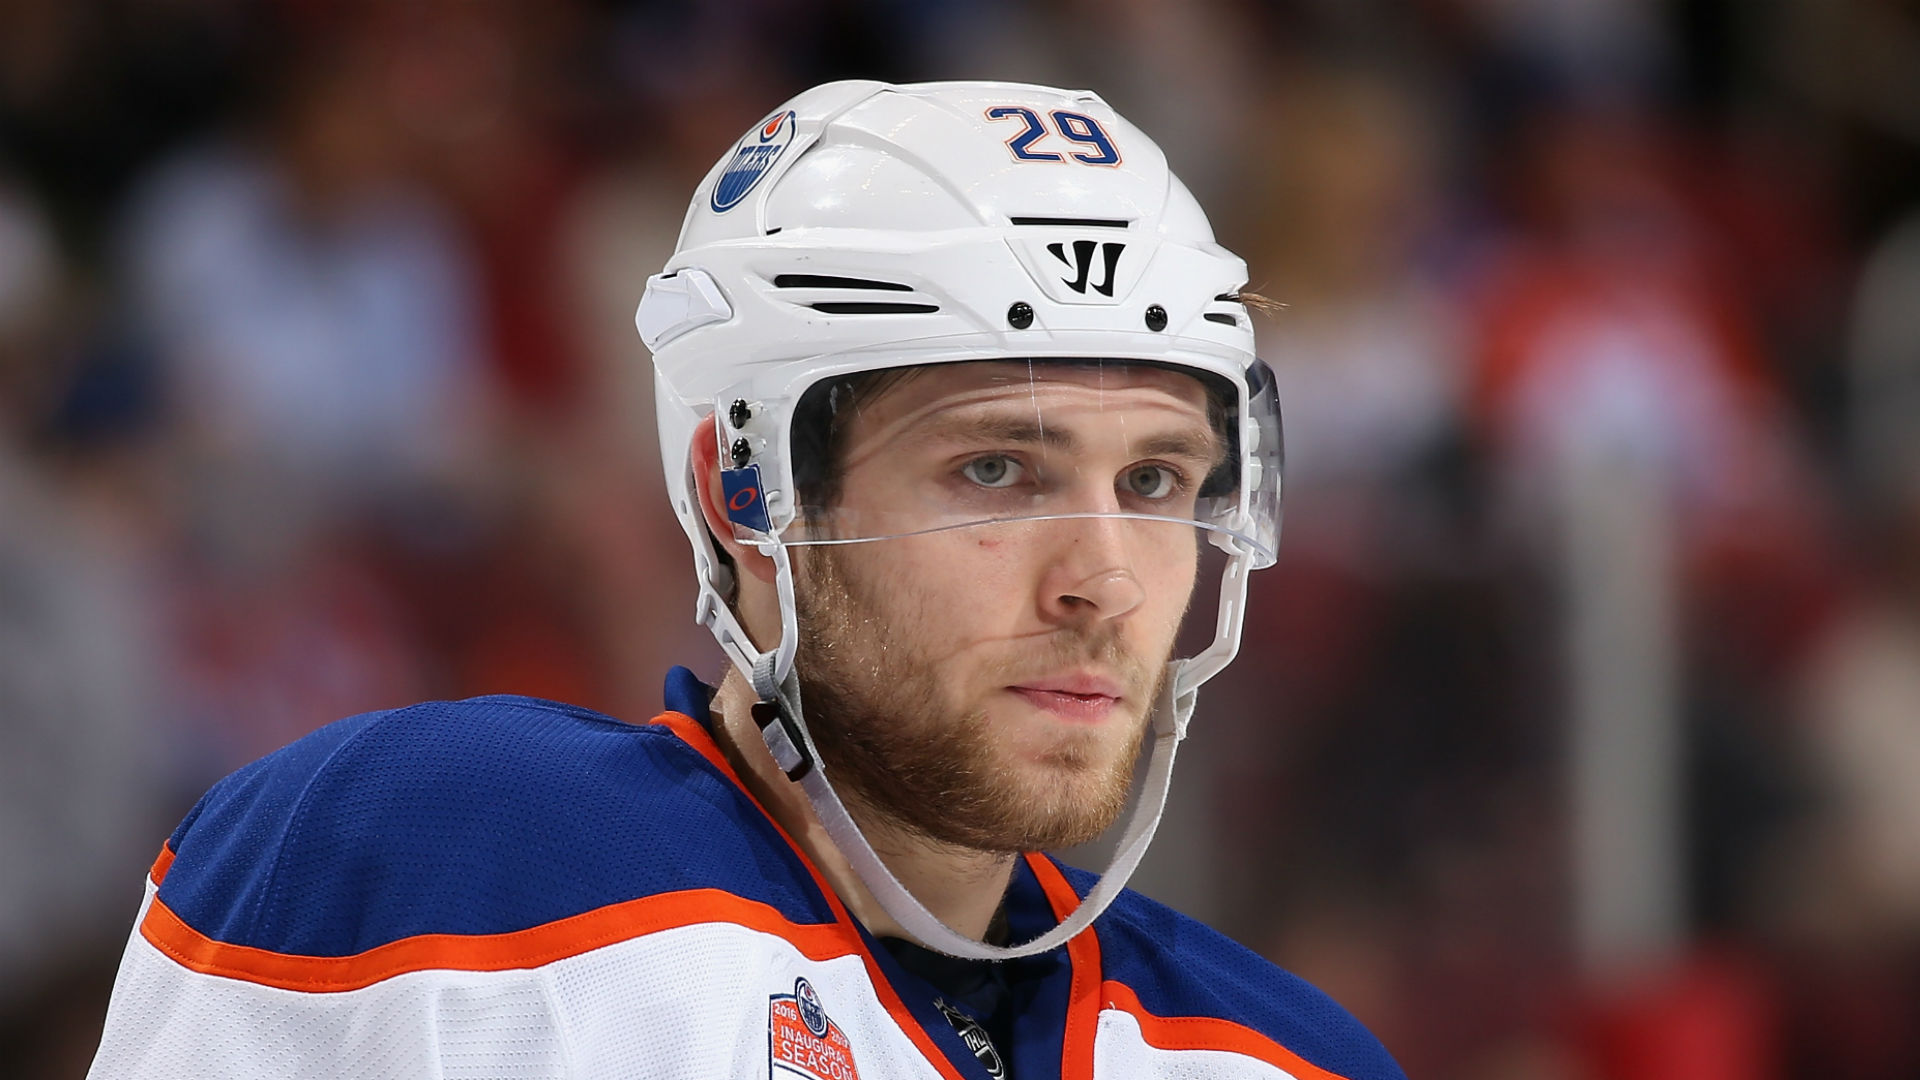 NHL playoffs 2017 Oilers' Leon Draisaitl spared suspension for Game 4